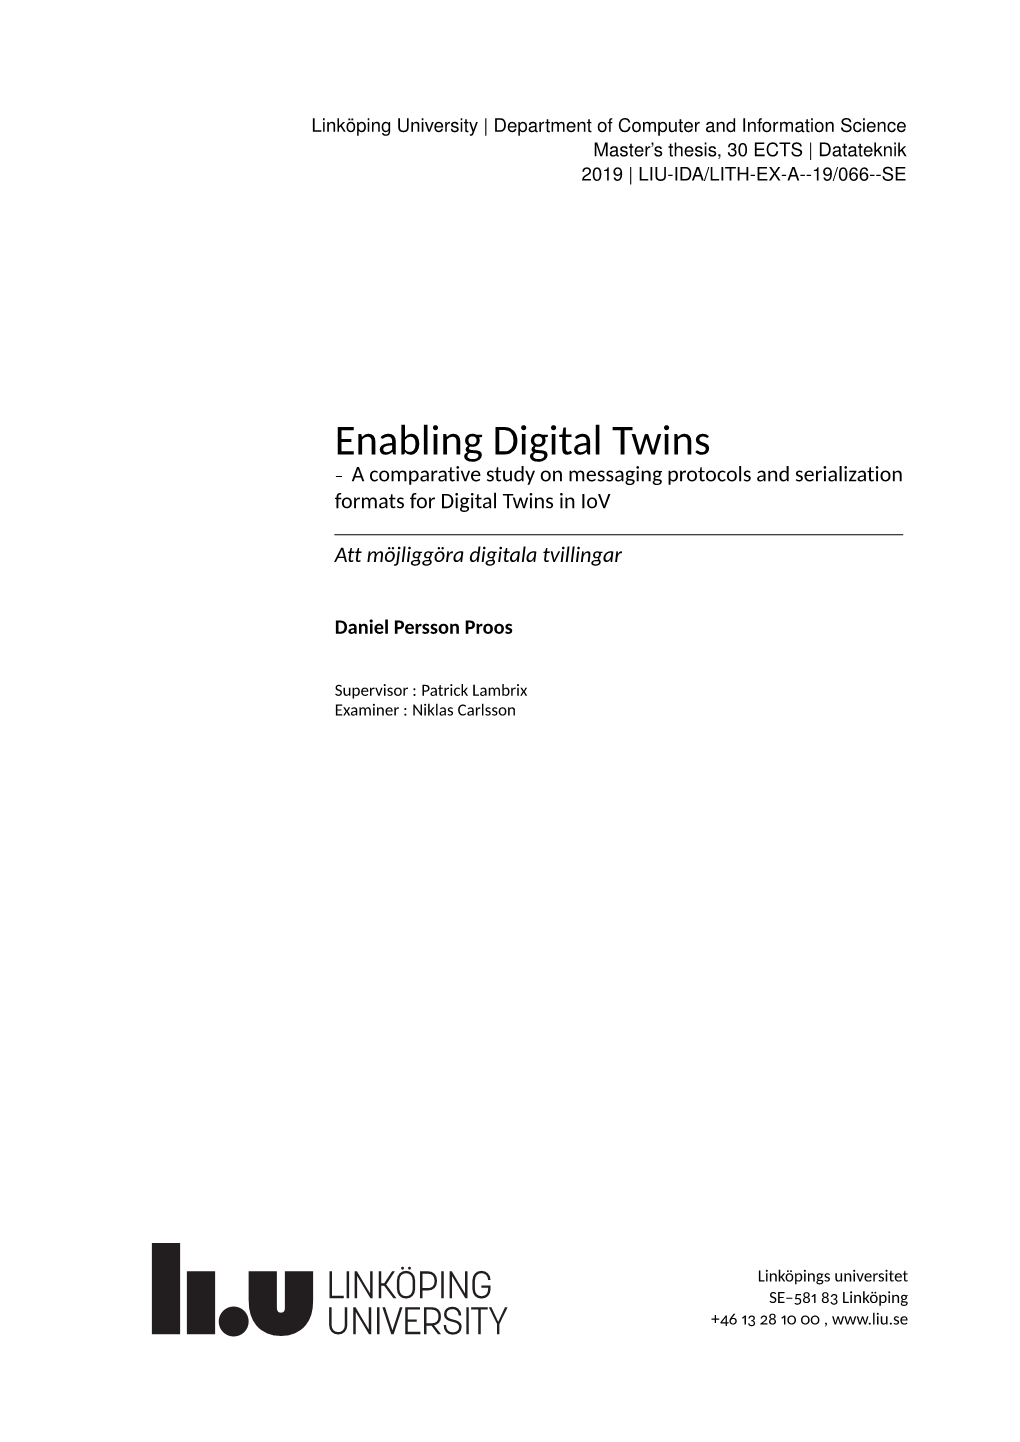 Enabling Digital Twins – a Comparative Study on Messaging Protocols and Serialization Formats for Digital Twins in Iov